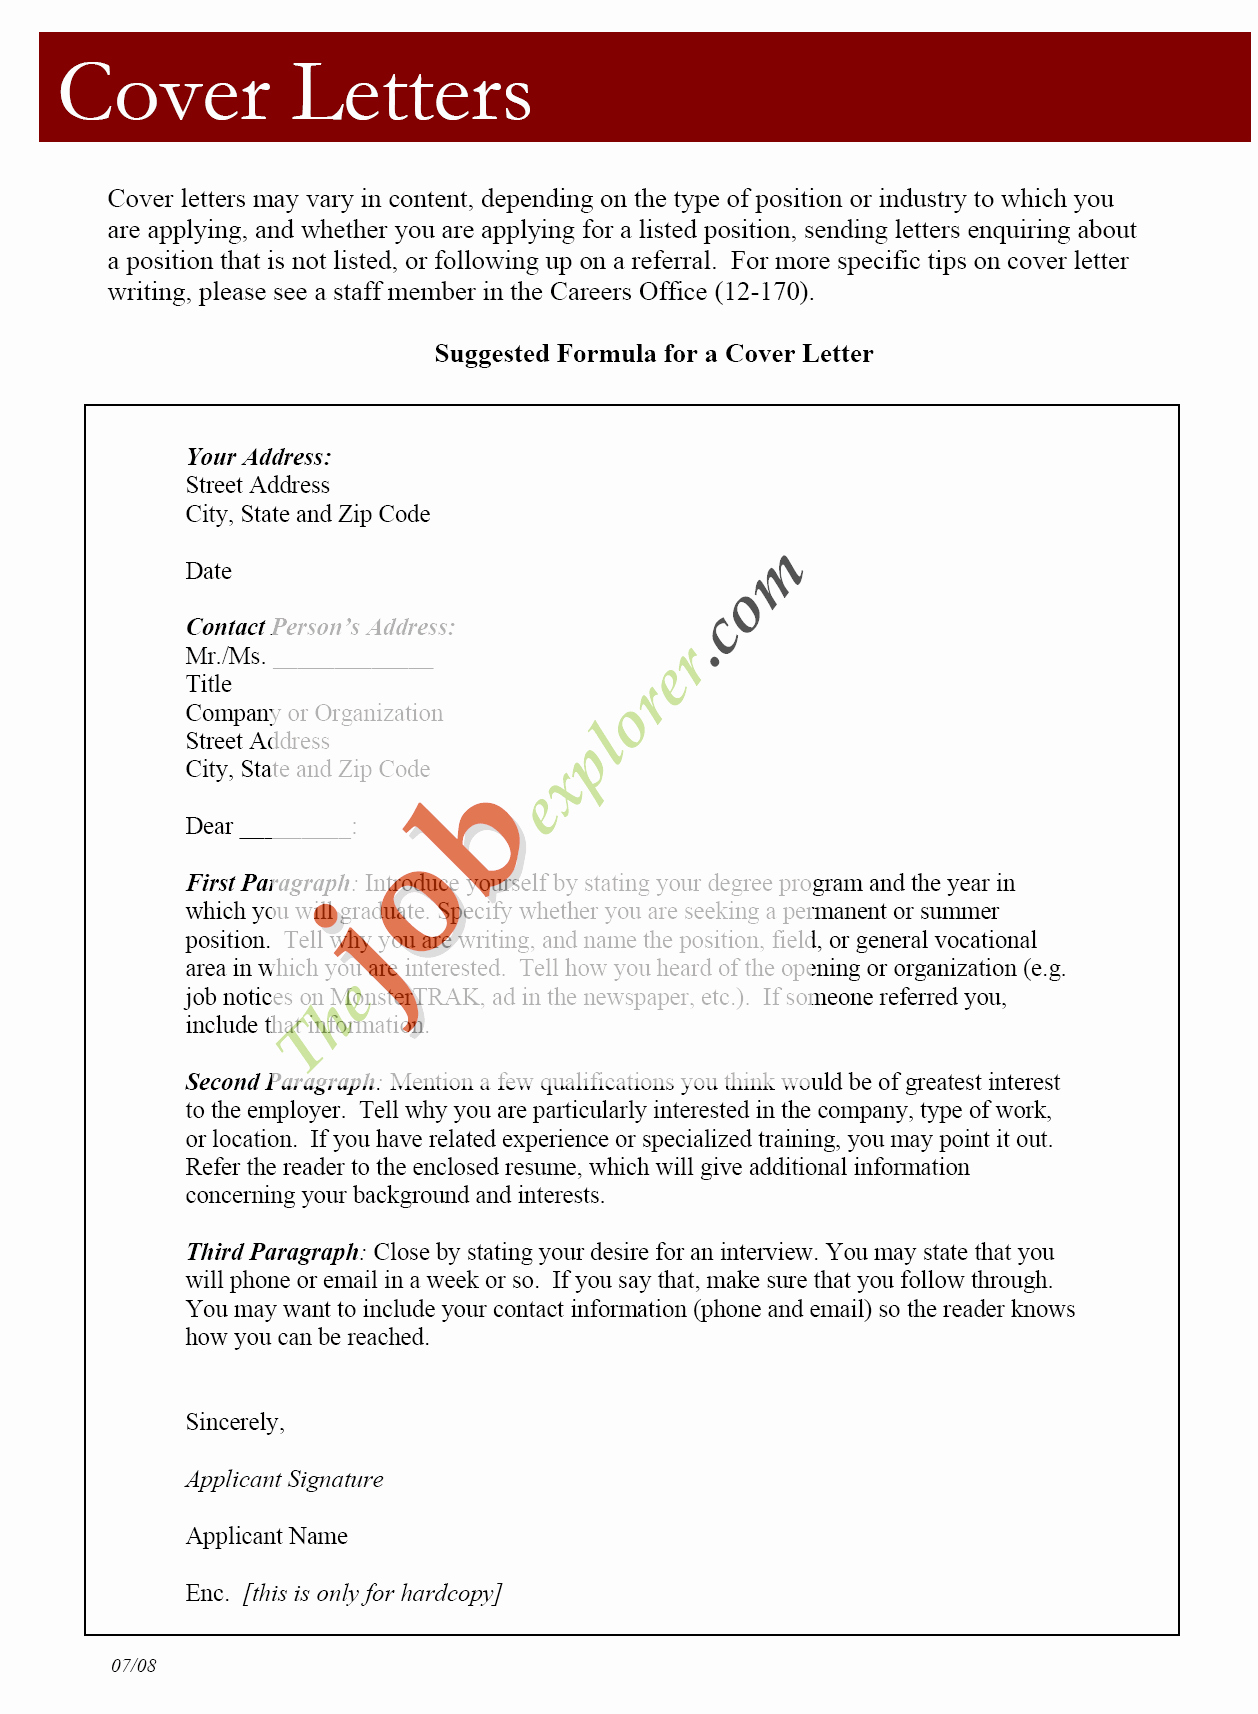 Cover Letter On A Resume Luxury Sample Resumes Free Resume Tips Resume Templates